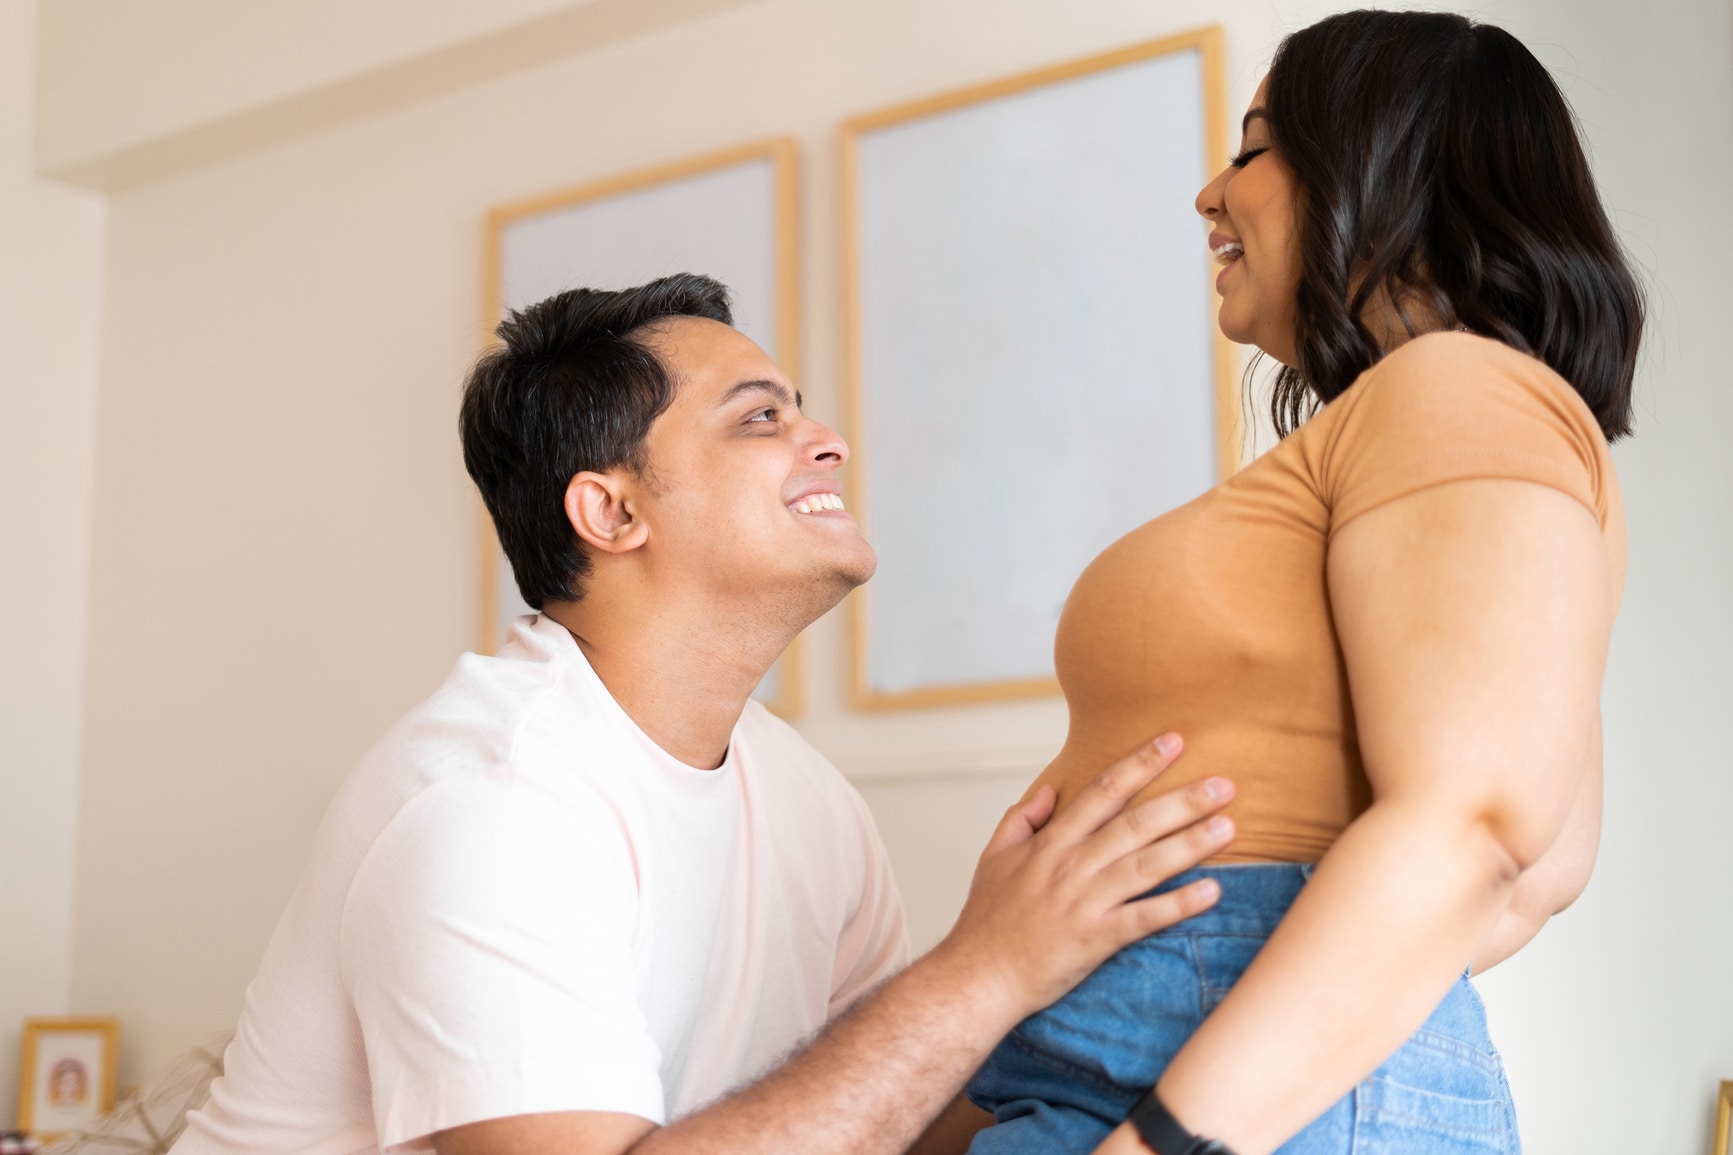 How to Tell Your Husband Youre Pregnant 10 Creative Ideas image pic